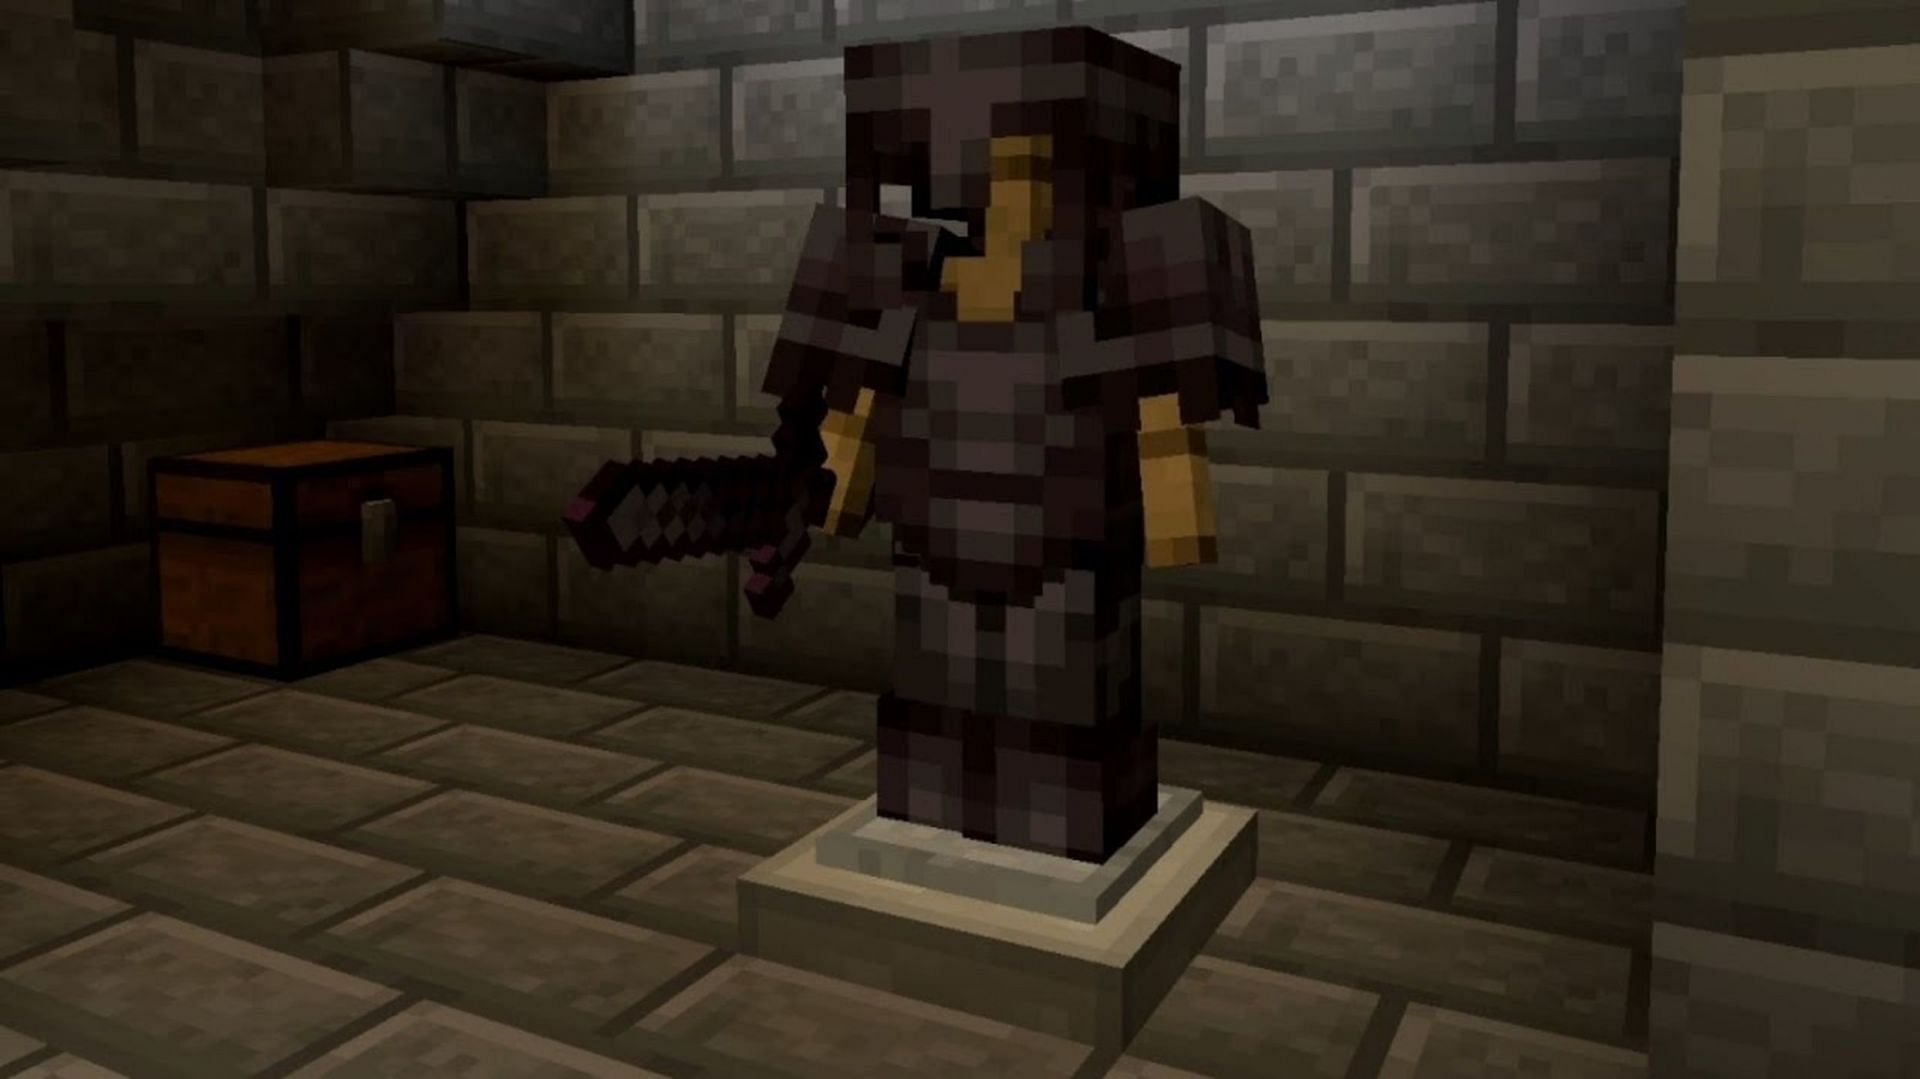 The Netherite armor should provide substantial protection in the deep dark biome (Image via AserGaming/Youtube)